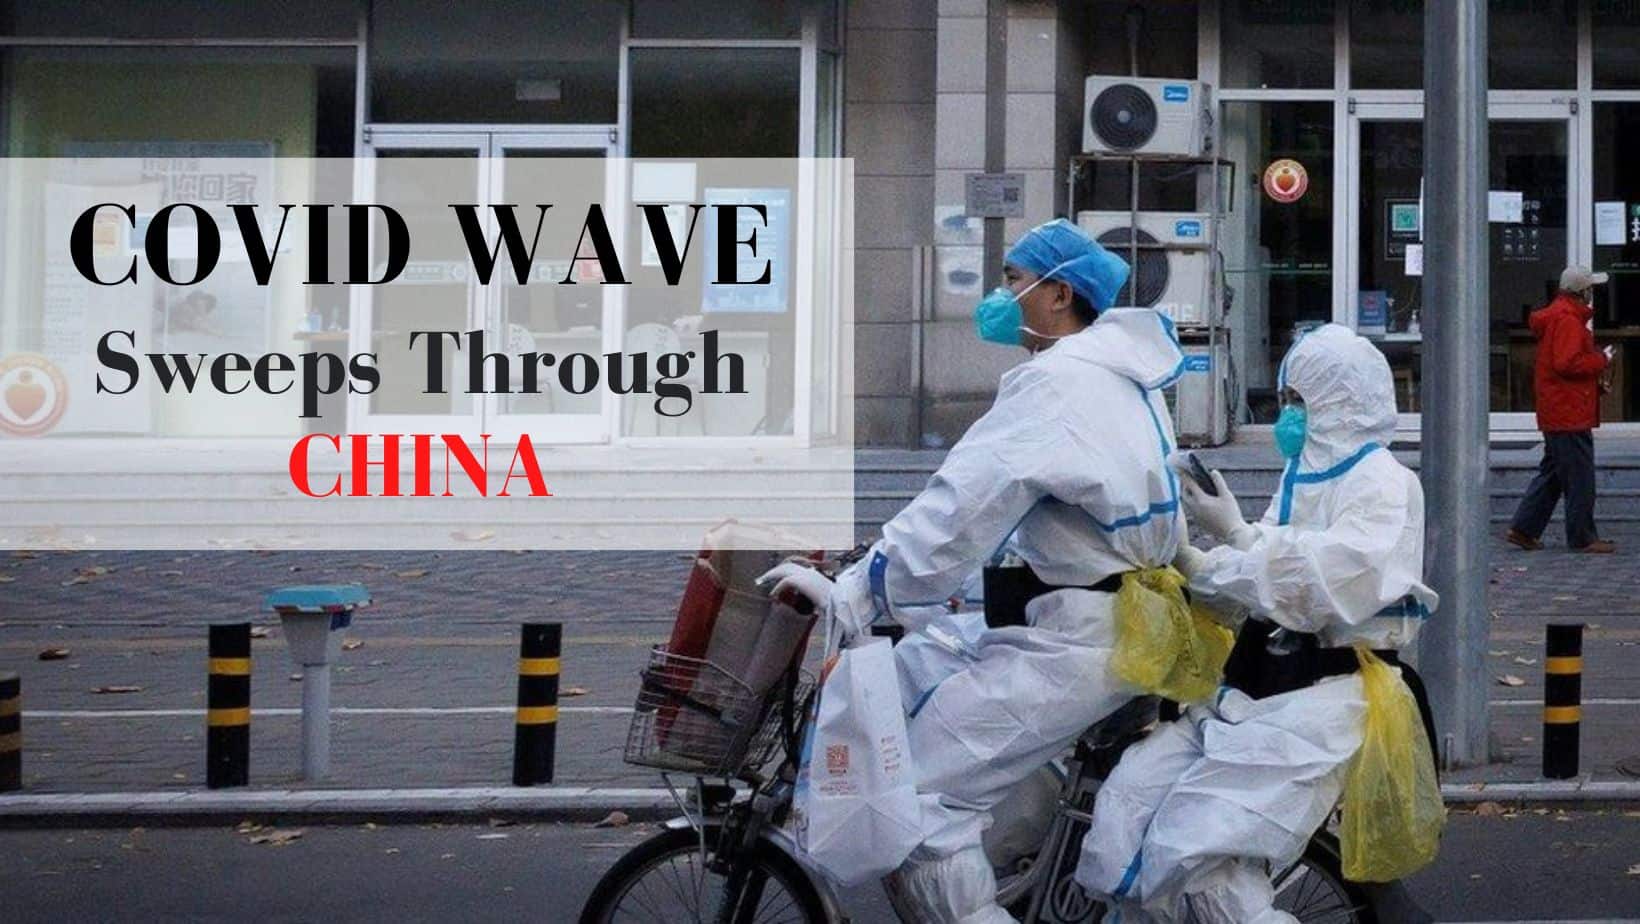 COVID-19 Omicron Rips Through China: Hospital Runs Out of Bed, Death Bodies Pile Up In Crematoriums